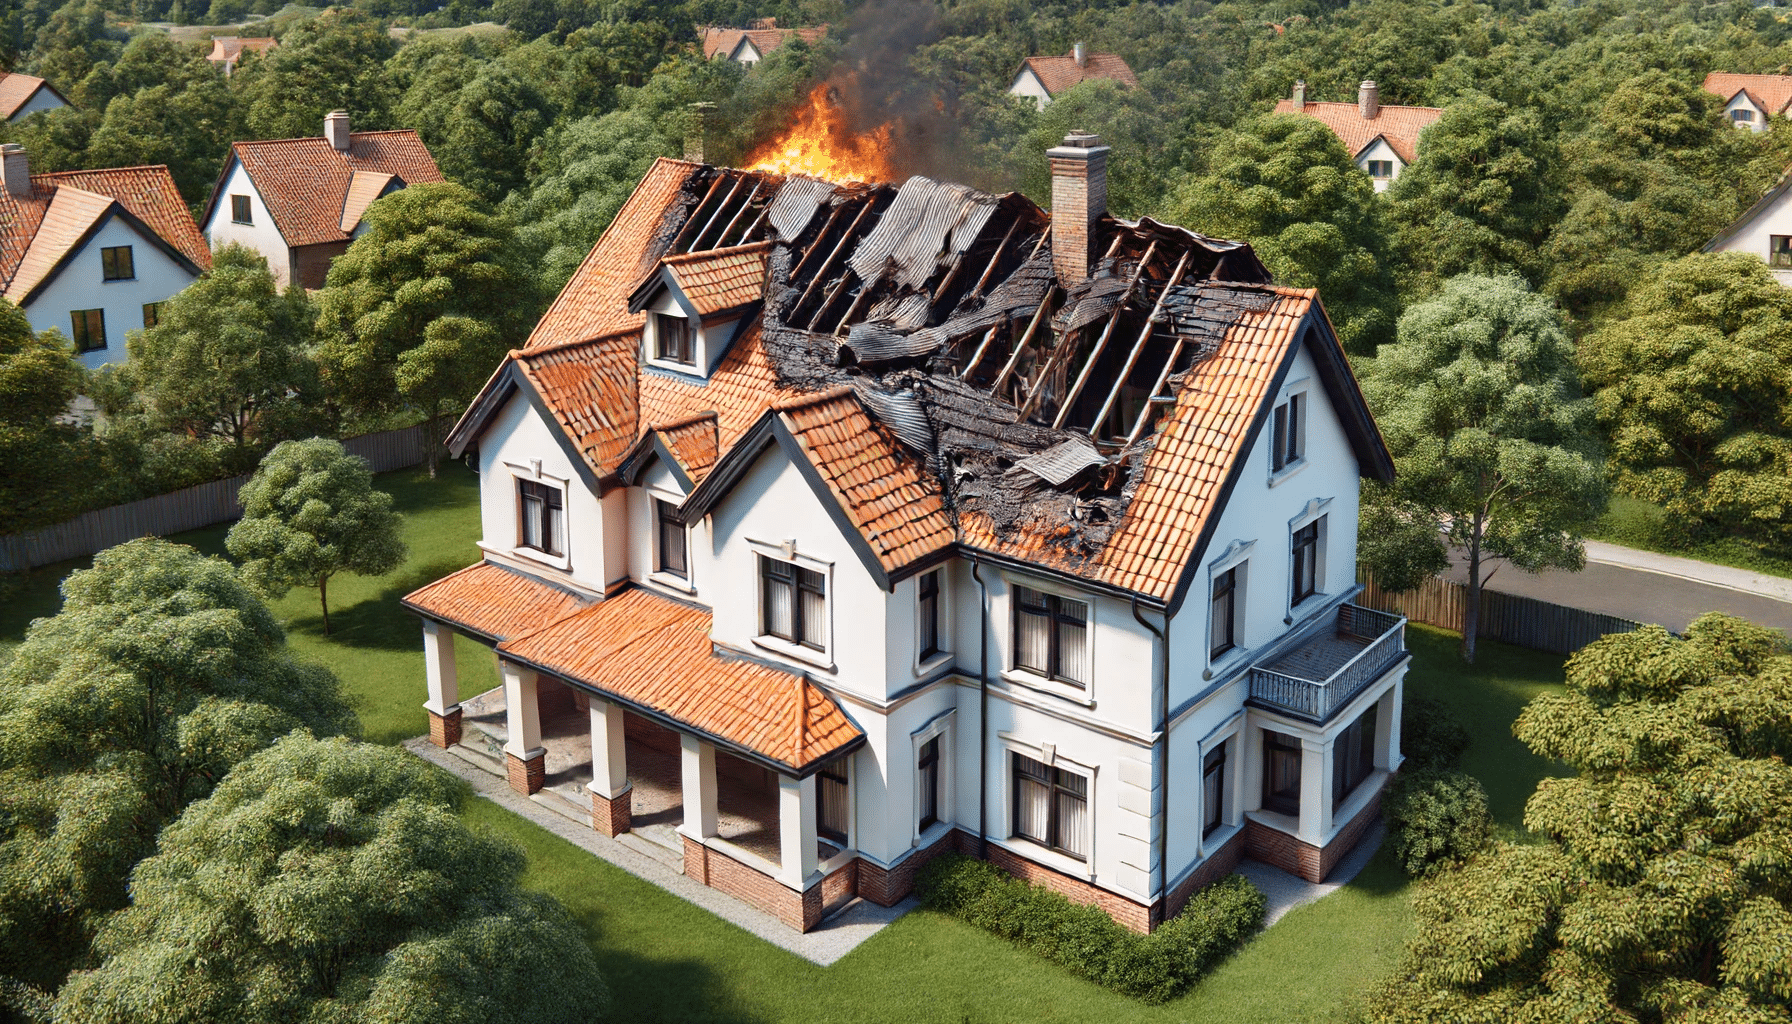 Sell Your Home As Is or Repair Fire Damage: Pros and Cons